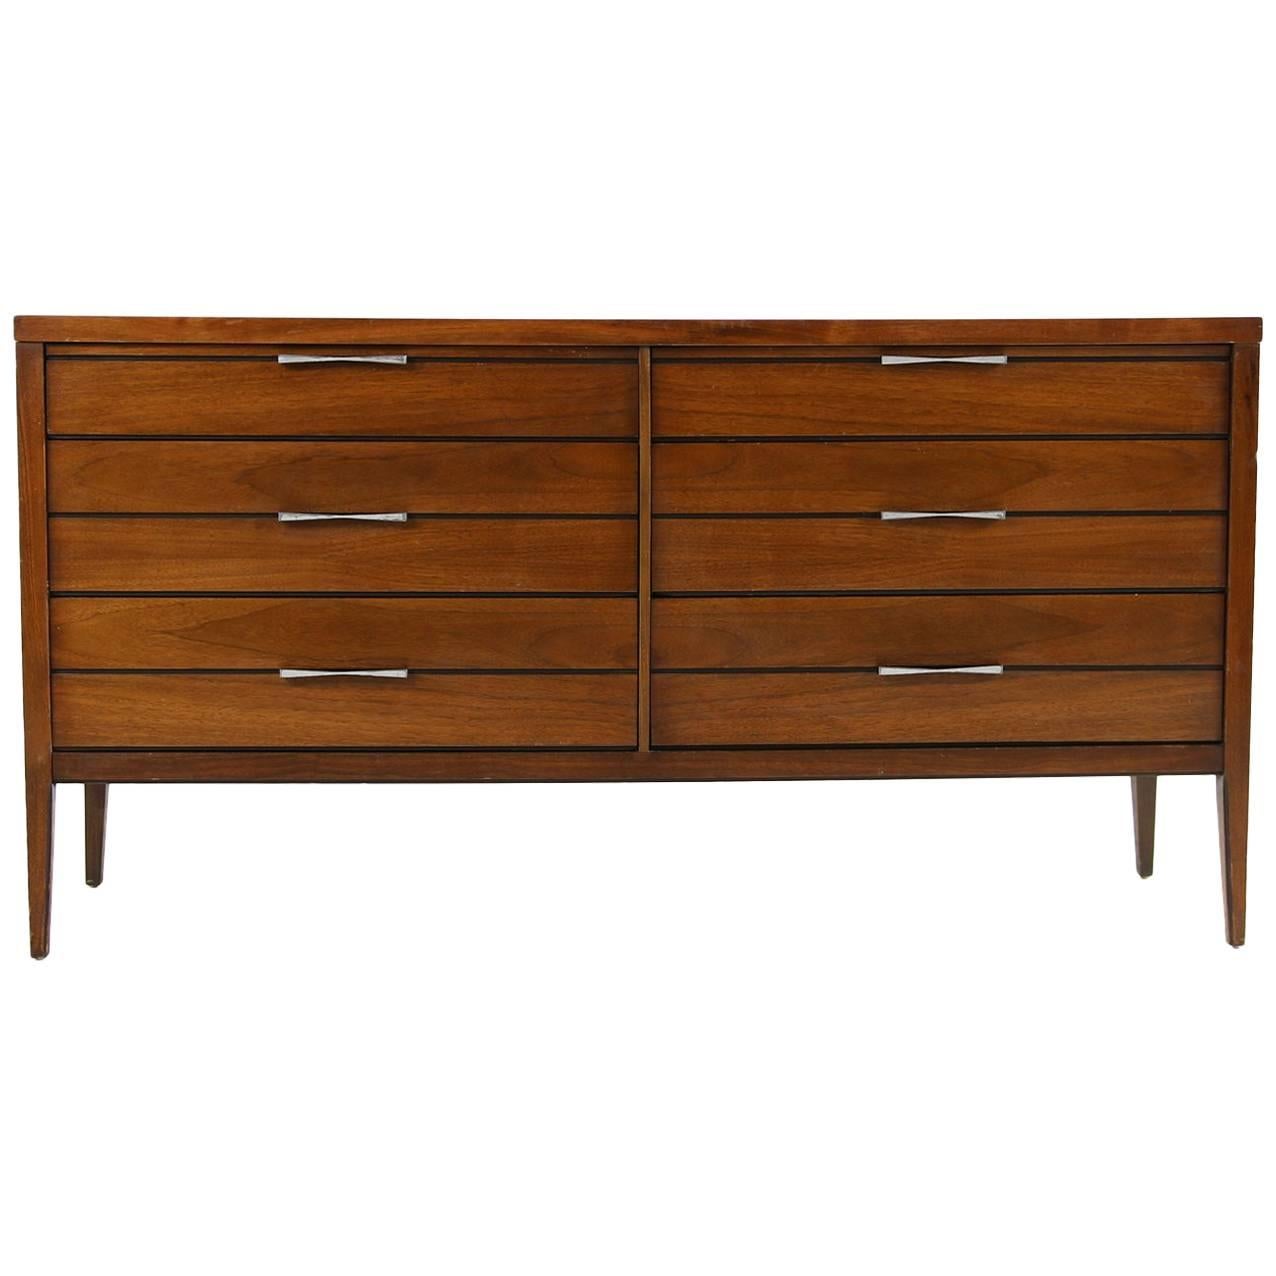 1950s American Walnut Sideboard, Chest of Six Drawers, Mid-Century Modern Design